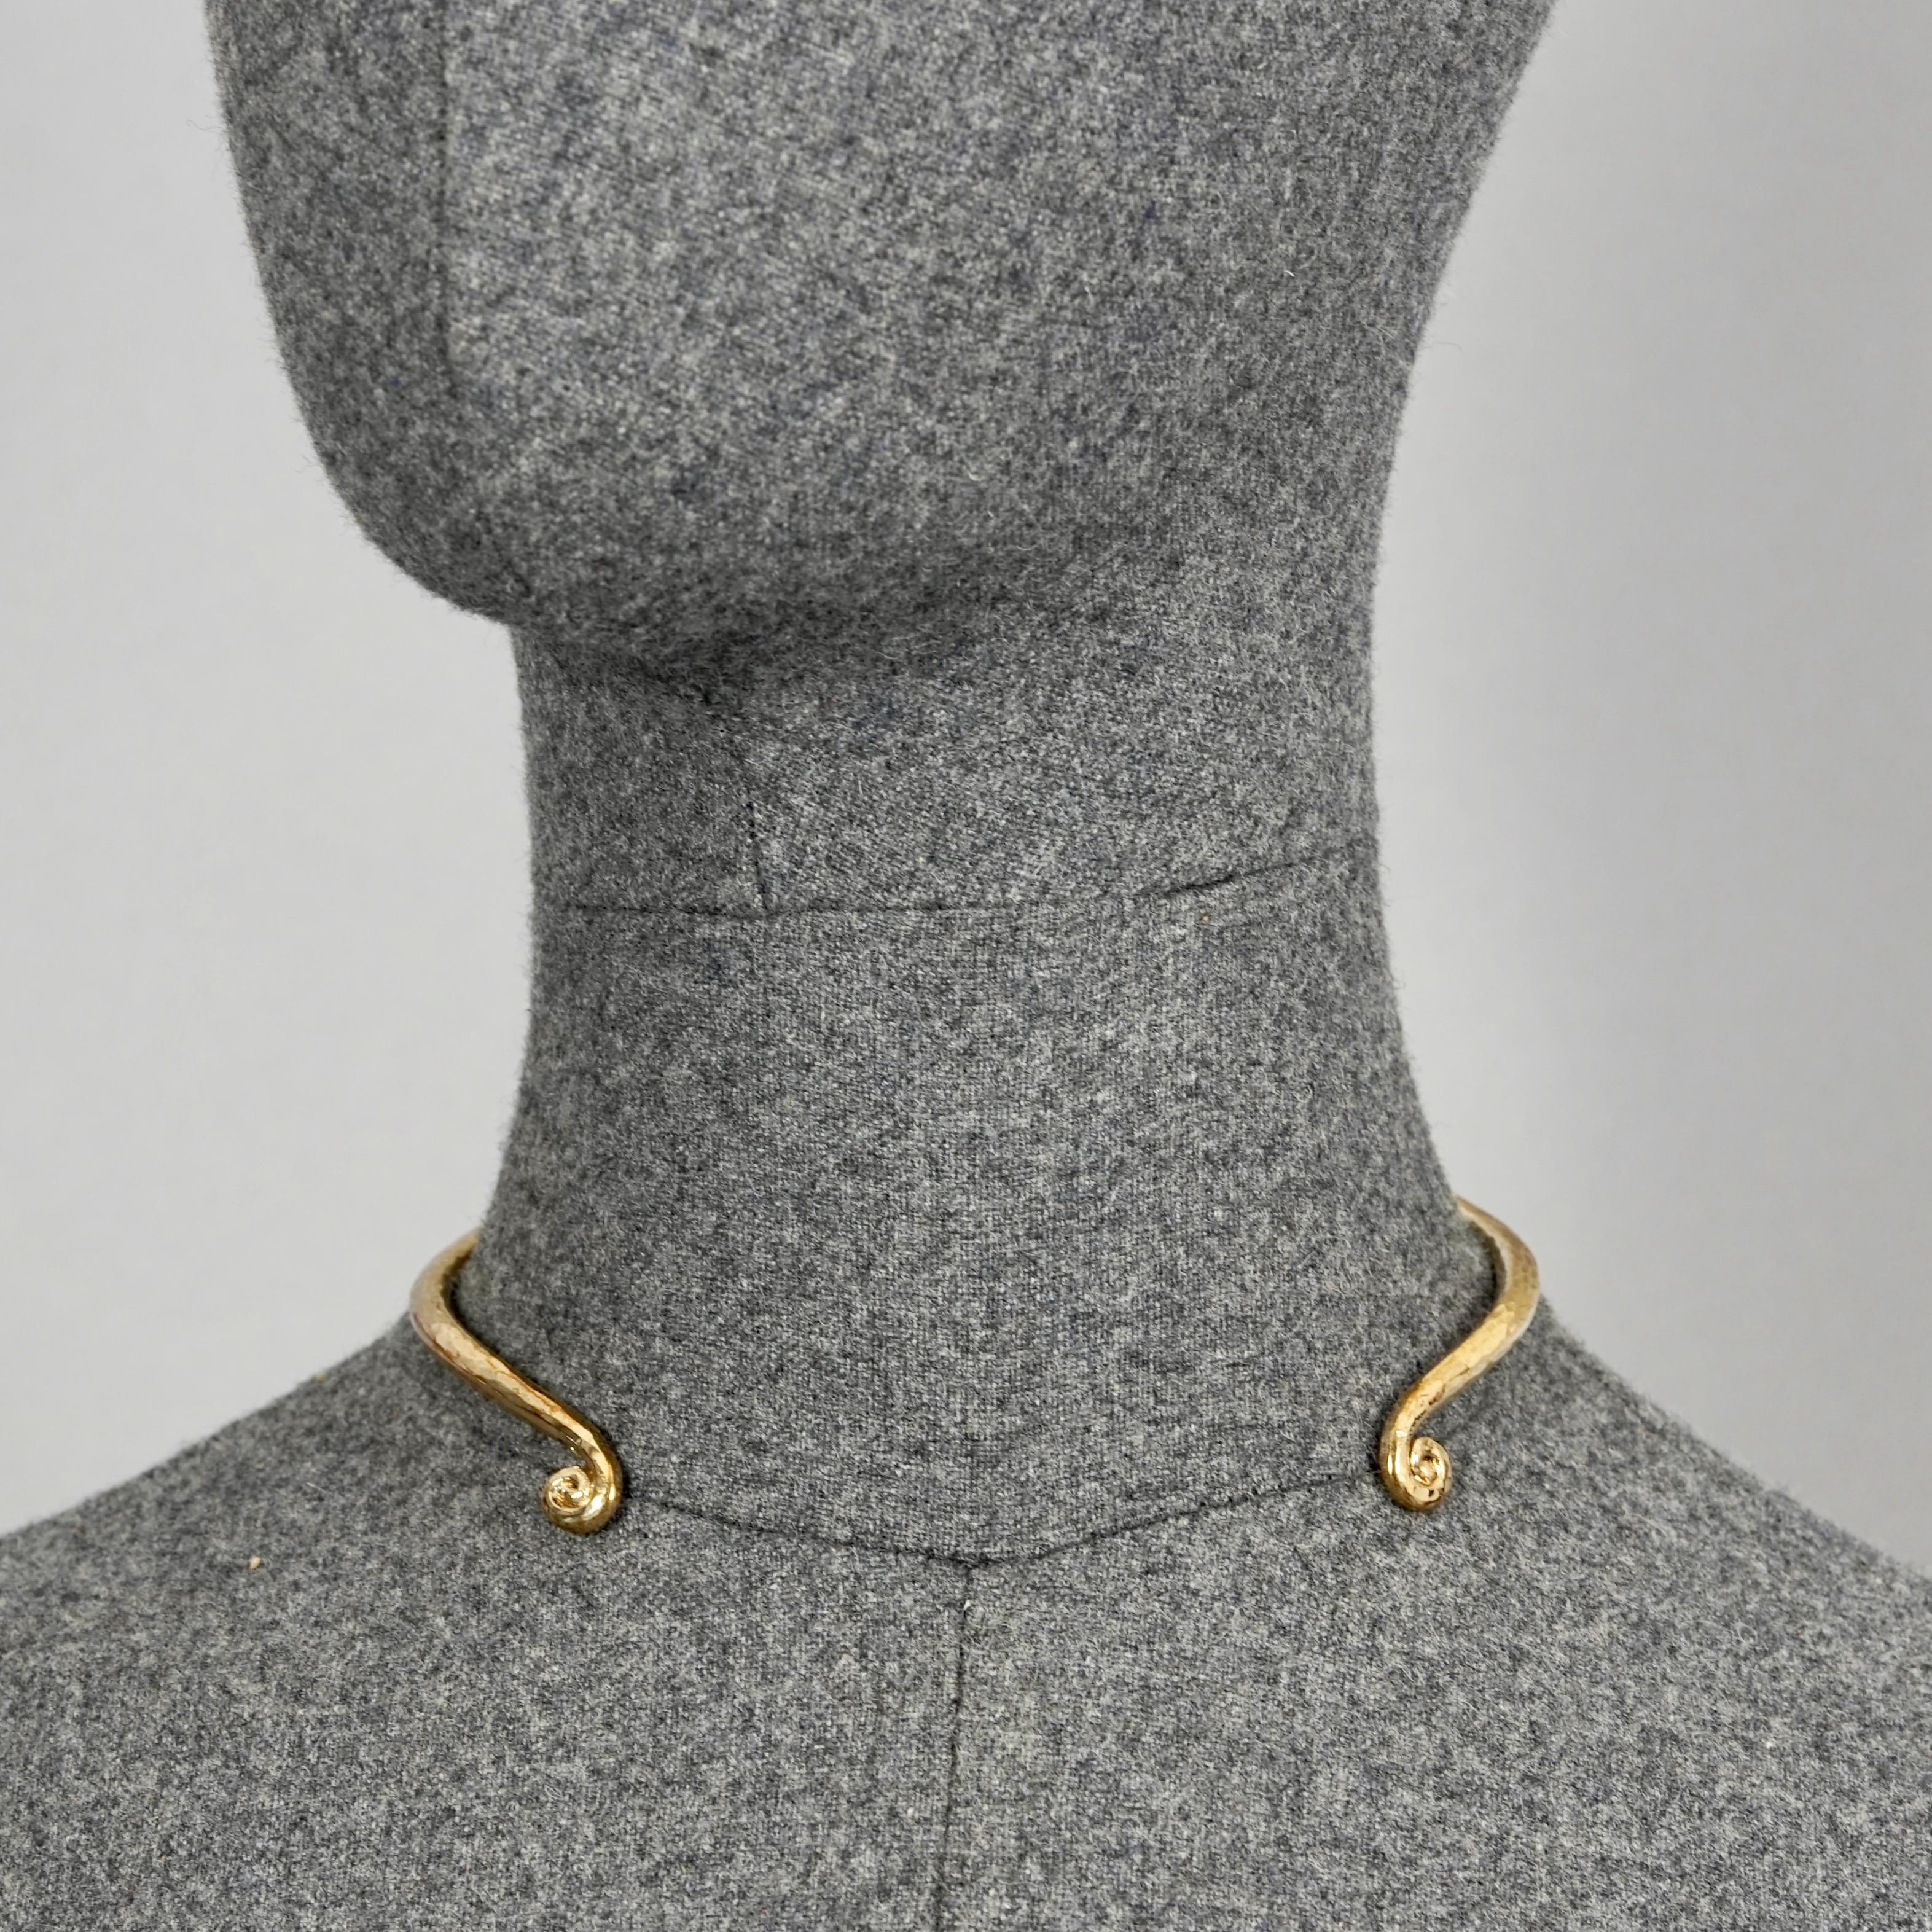 Vintage YVES SAINT LAURENT Ysl Rigid Spiral Choker Necklace

Measurements:
Circumference: 13.58 inches (34.5 cm) including the opening
Opening: 3.35 inches (8.5 cm)

Features:
- 100% Authentic YVES SAINT LAURENT.
- Skinny rigid choker with spiral